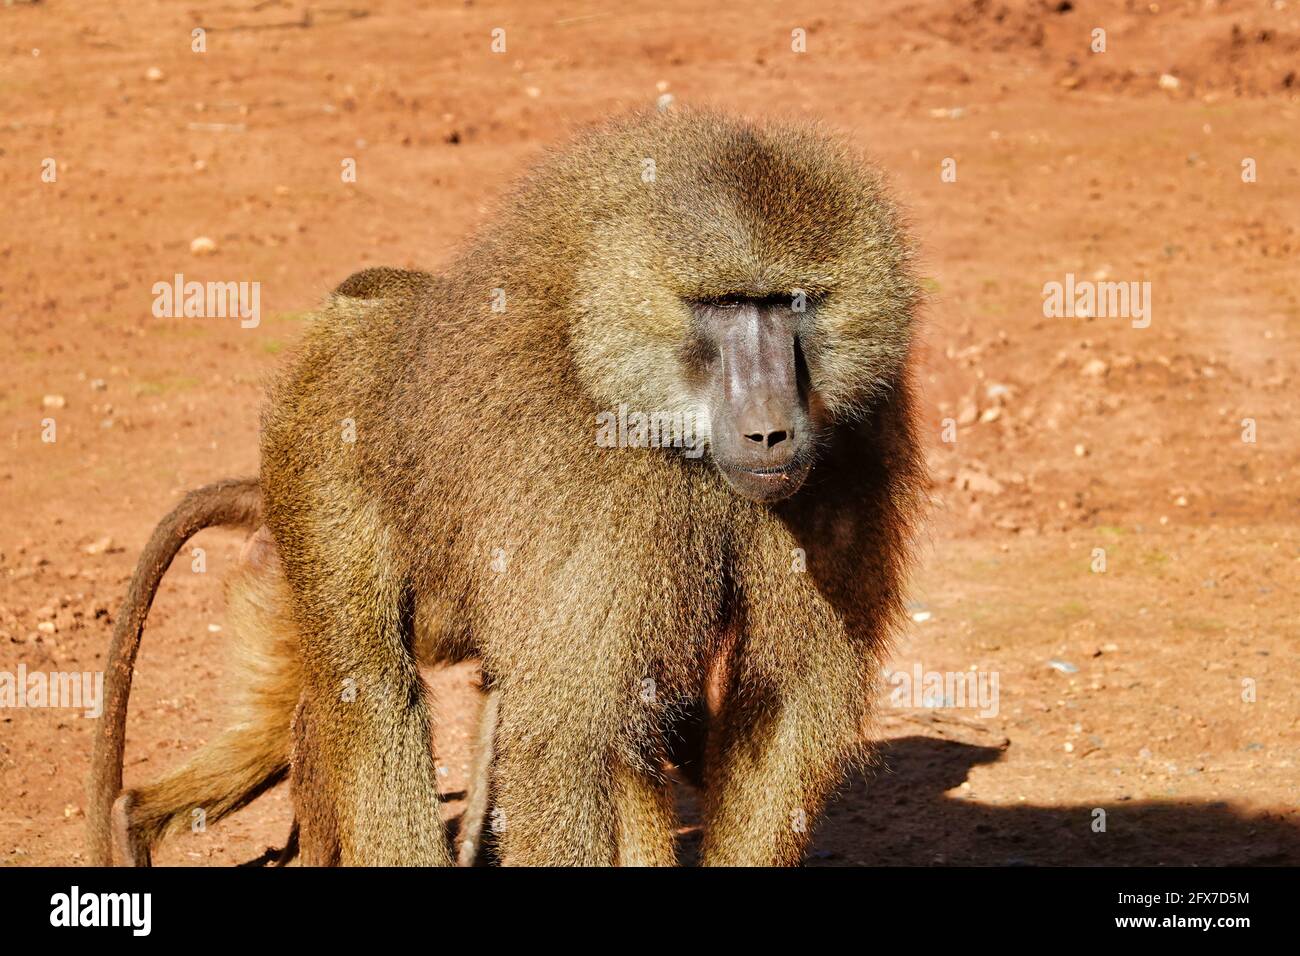 Guinea baboon walks on the ground at a zoo under the sunlight Stock Photo